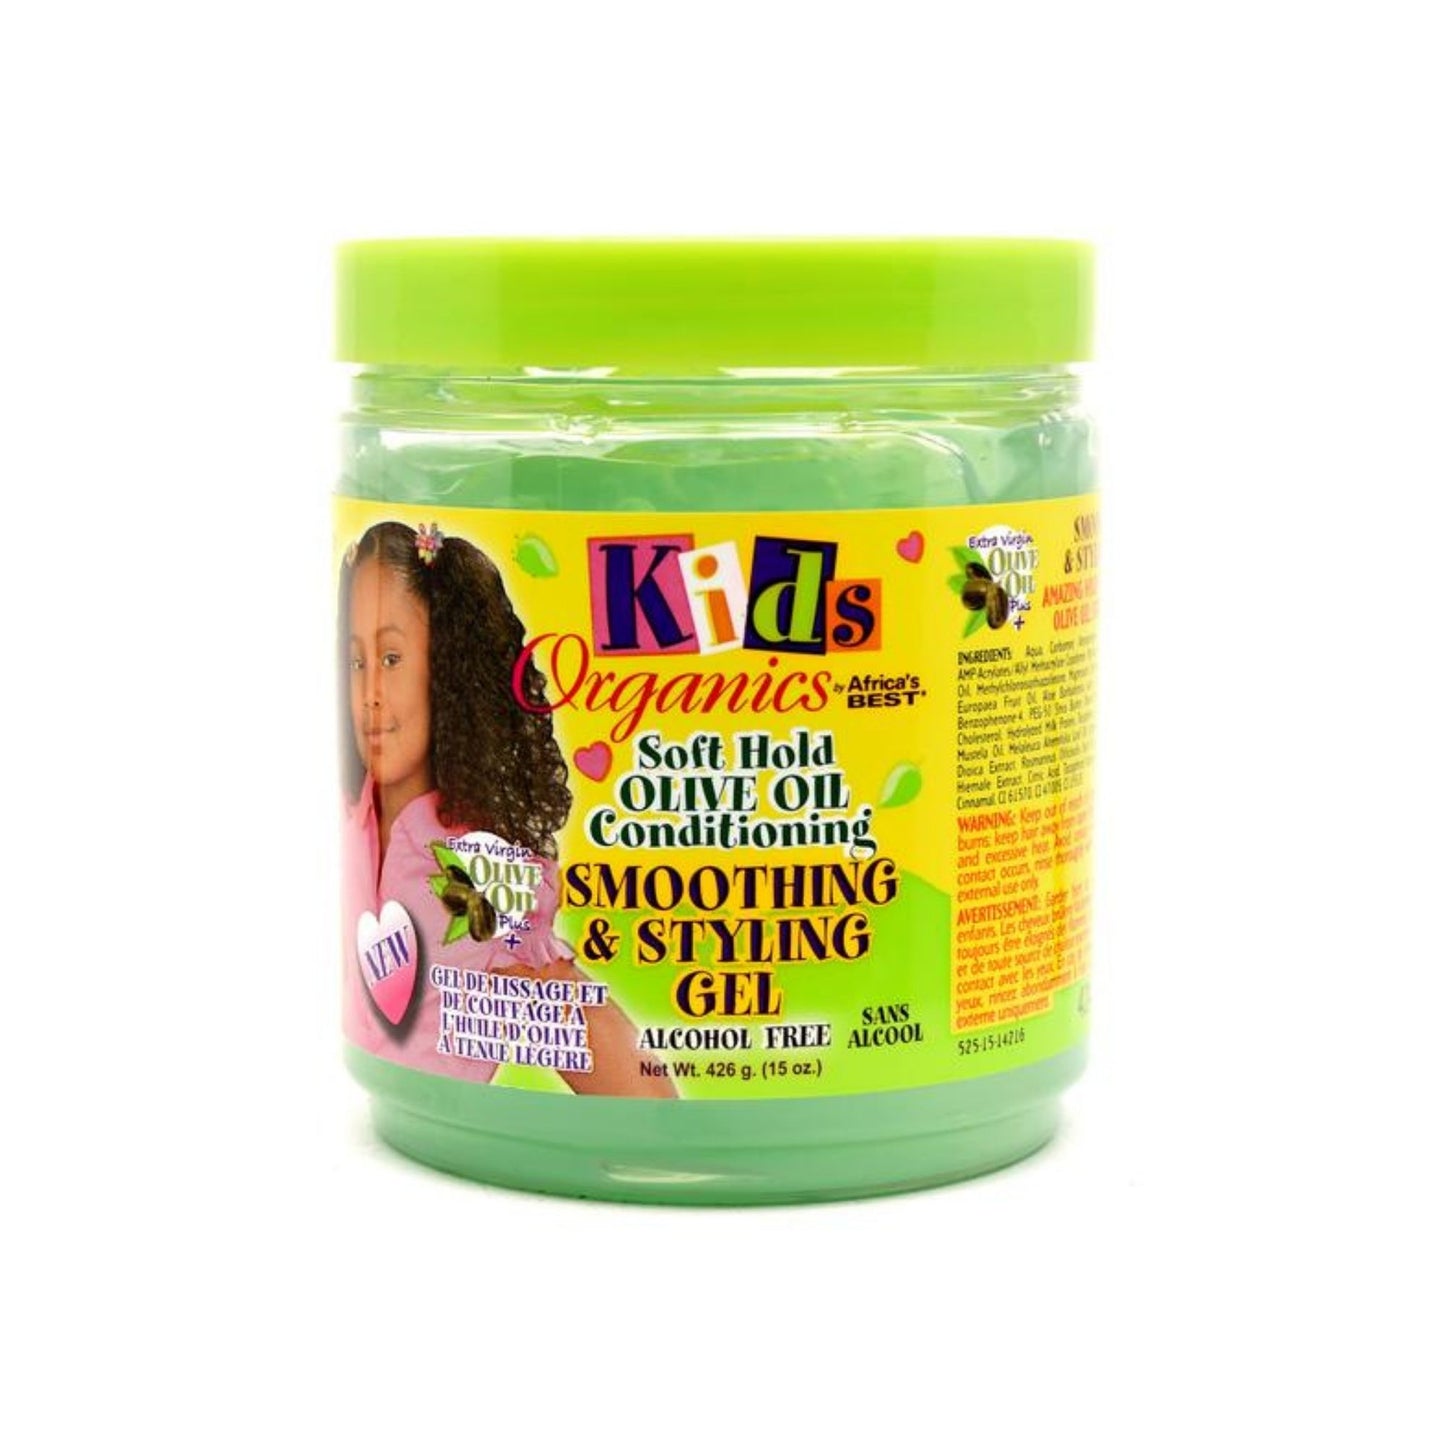 Africa’s Best Kids Organics Olive Oil Smoothing & Styling Gel - 426g